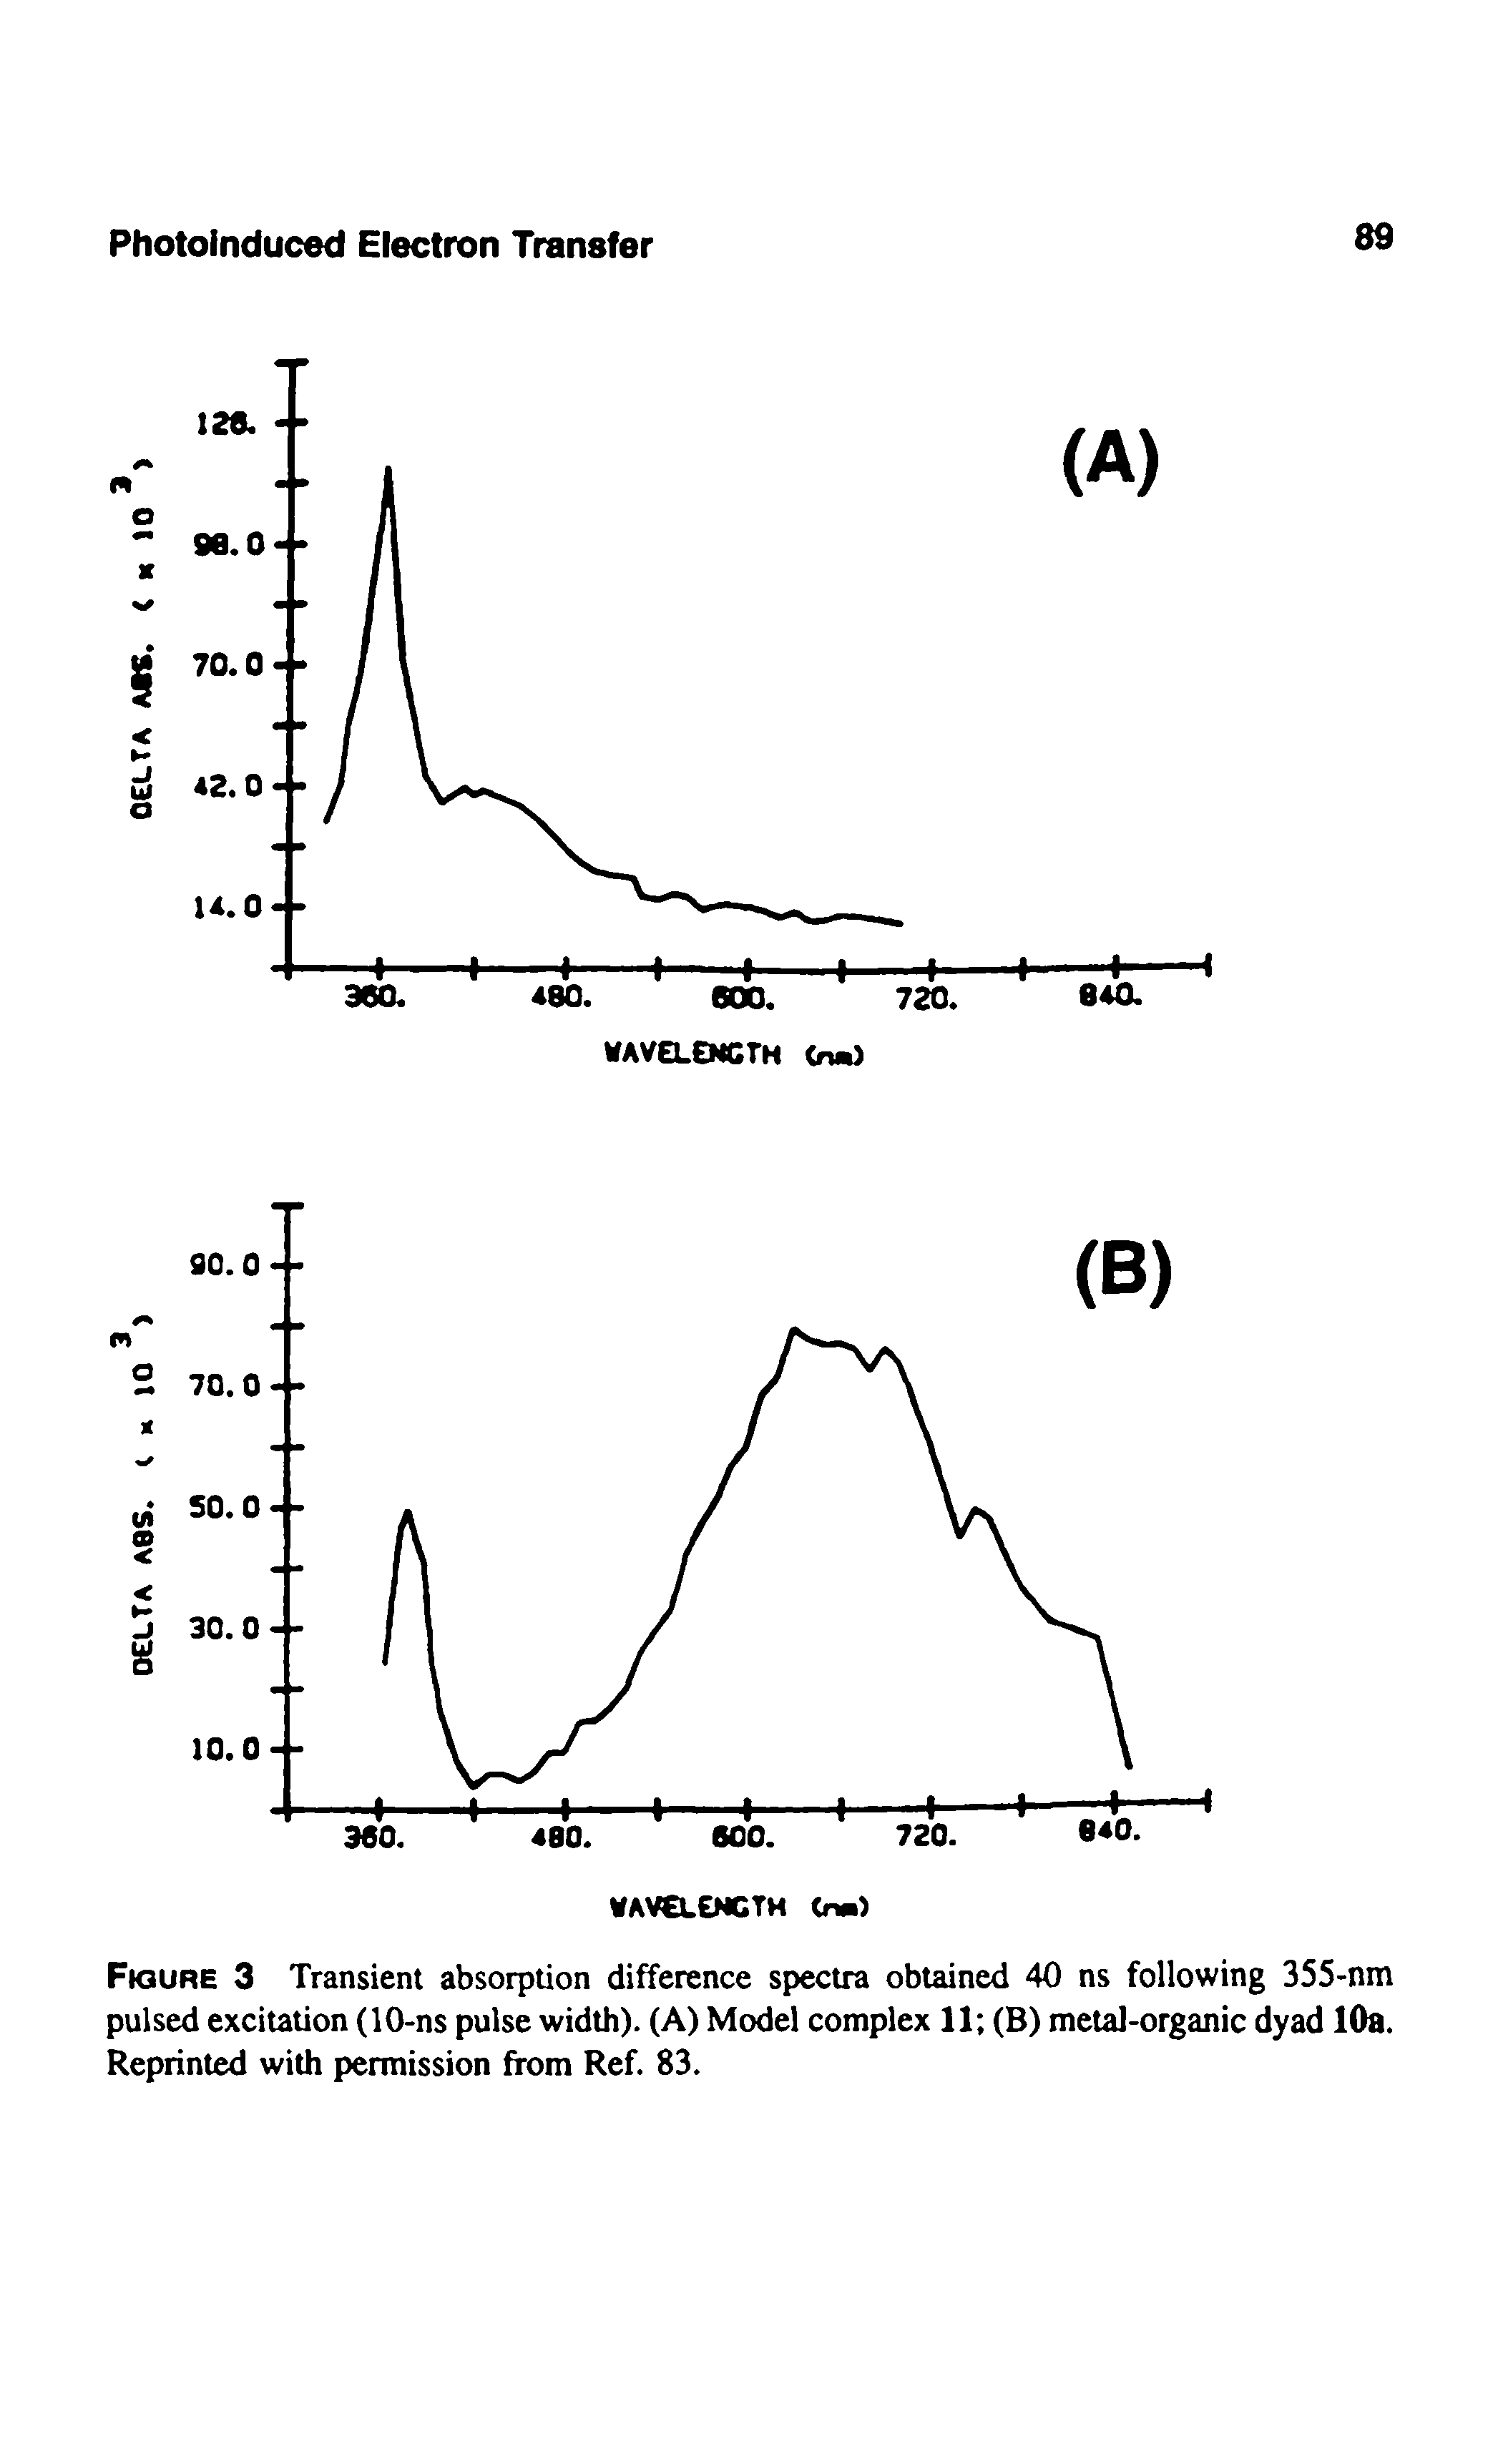 Figure 3 Transient absorption difference spectra obtained 40 ns following 355-nm pulsed excitation (10-ns pulse width). (A) Model complex 11 (B) metal-organic dyad 10a. Reprinted with permission from Ref. 83.